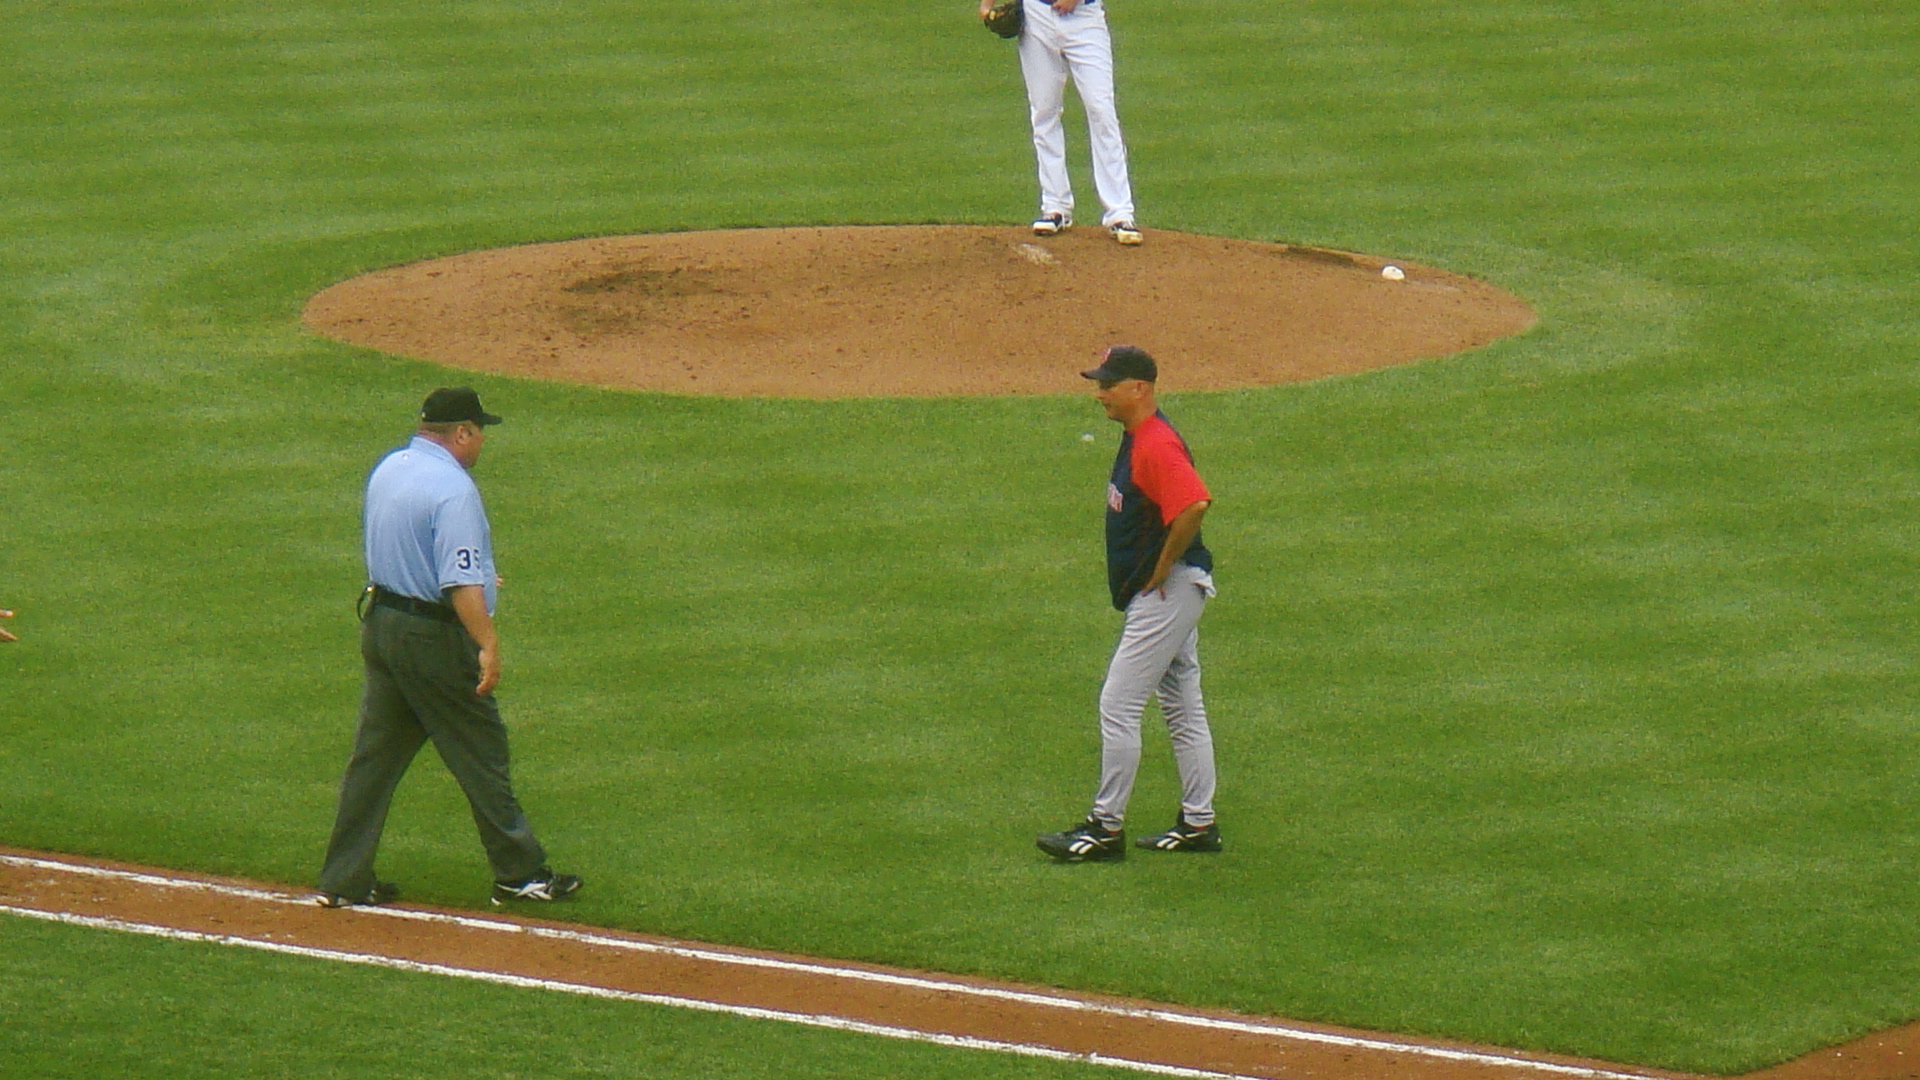 two men are on the field with baseball equipment